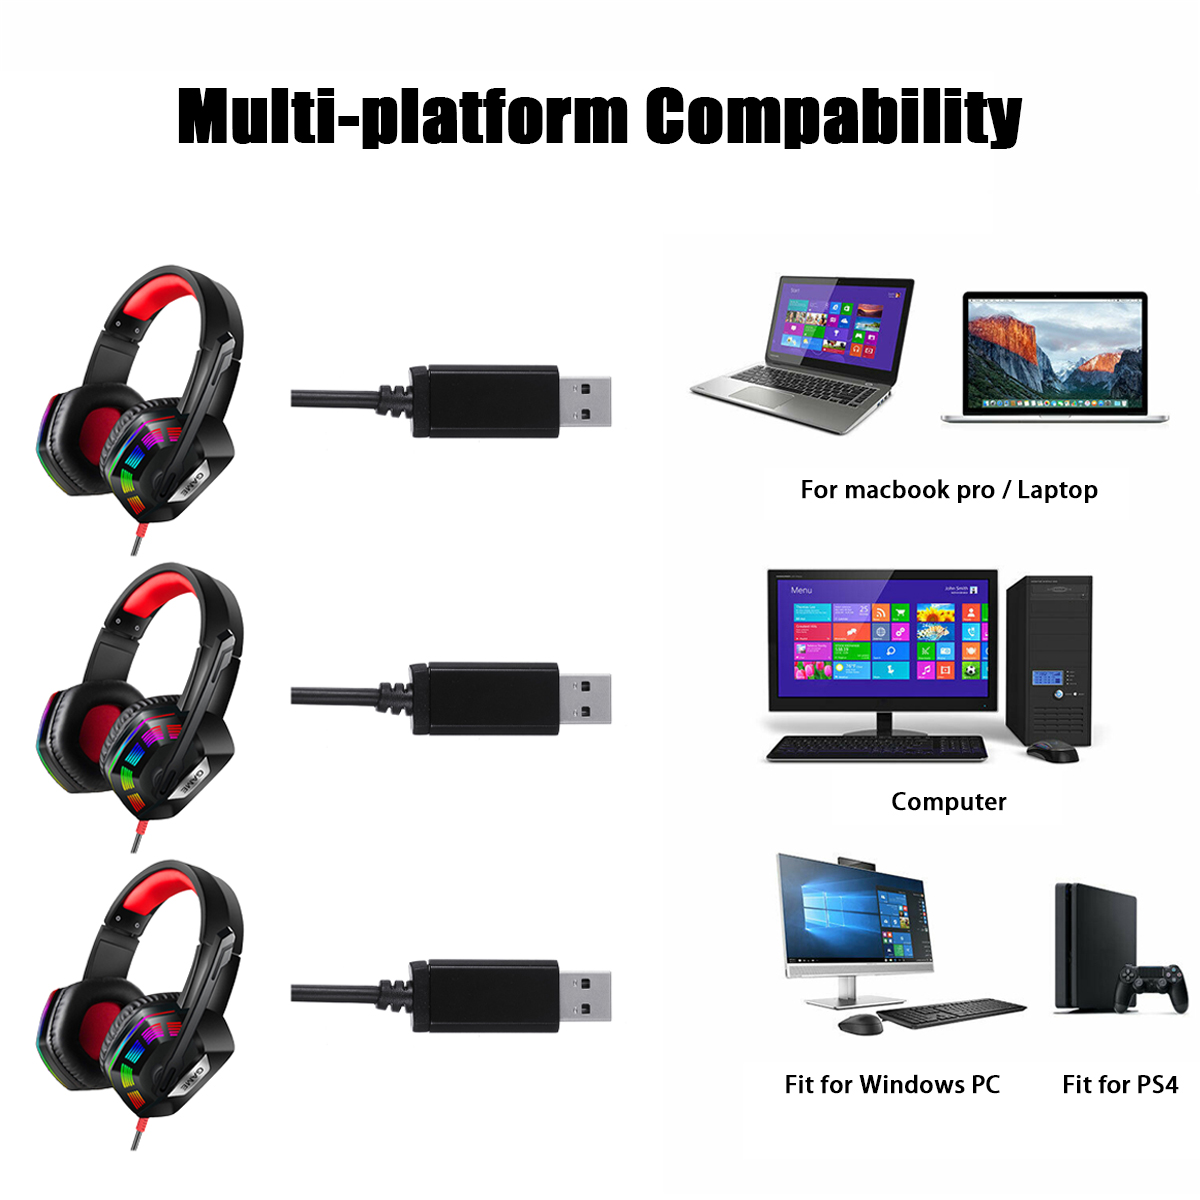 M1-Gaming-Headset-Surround-Sound-Music-Earphones-USB-71--35mm-Wired-RGB-Backlight-Game-Headphones-wi-1827492-19